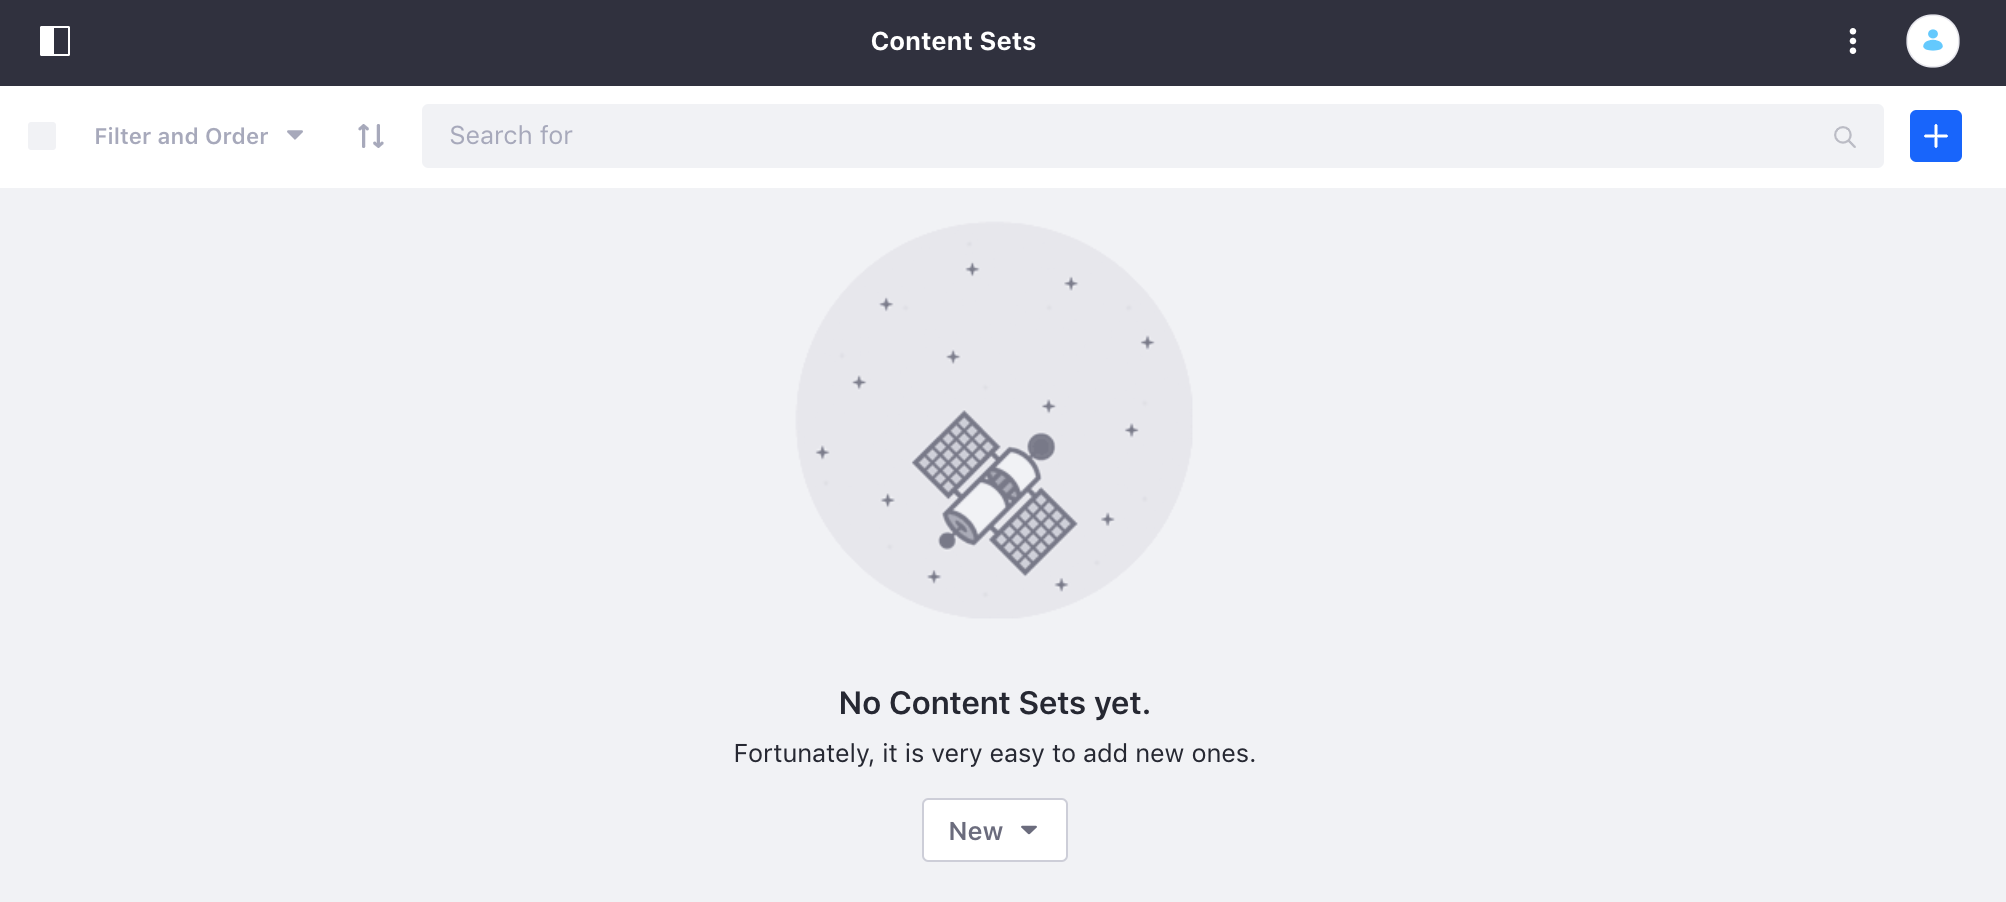 Content Sets is found in the Content & Data section of Site Administration.